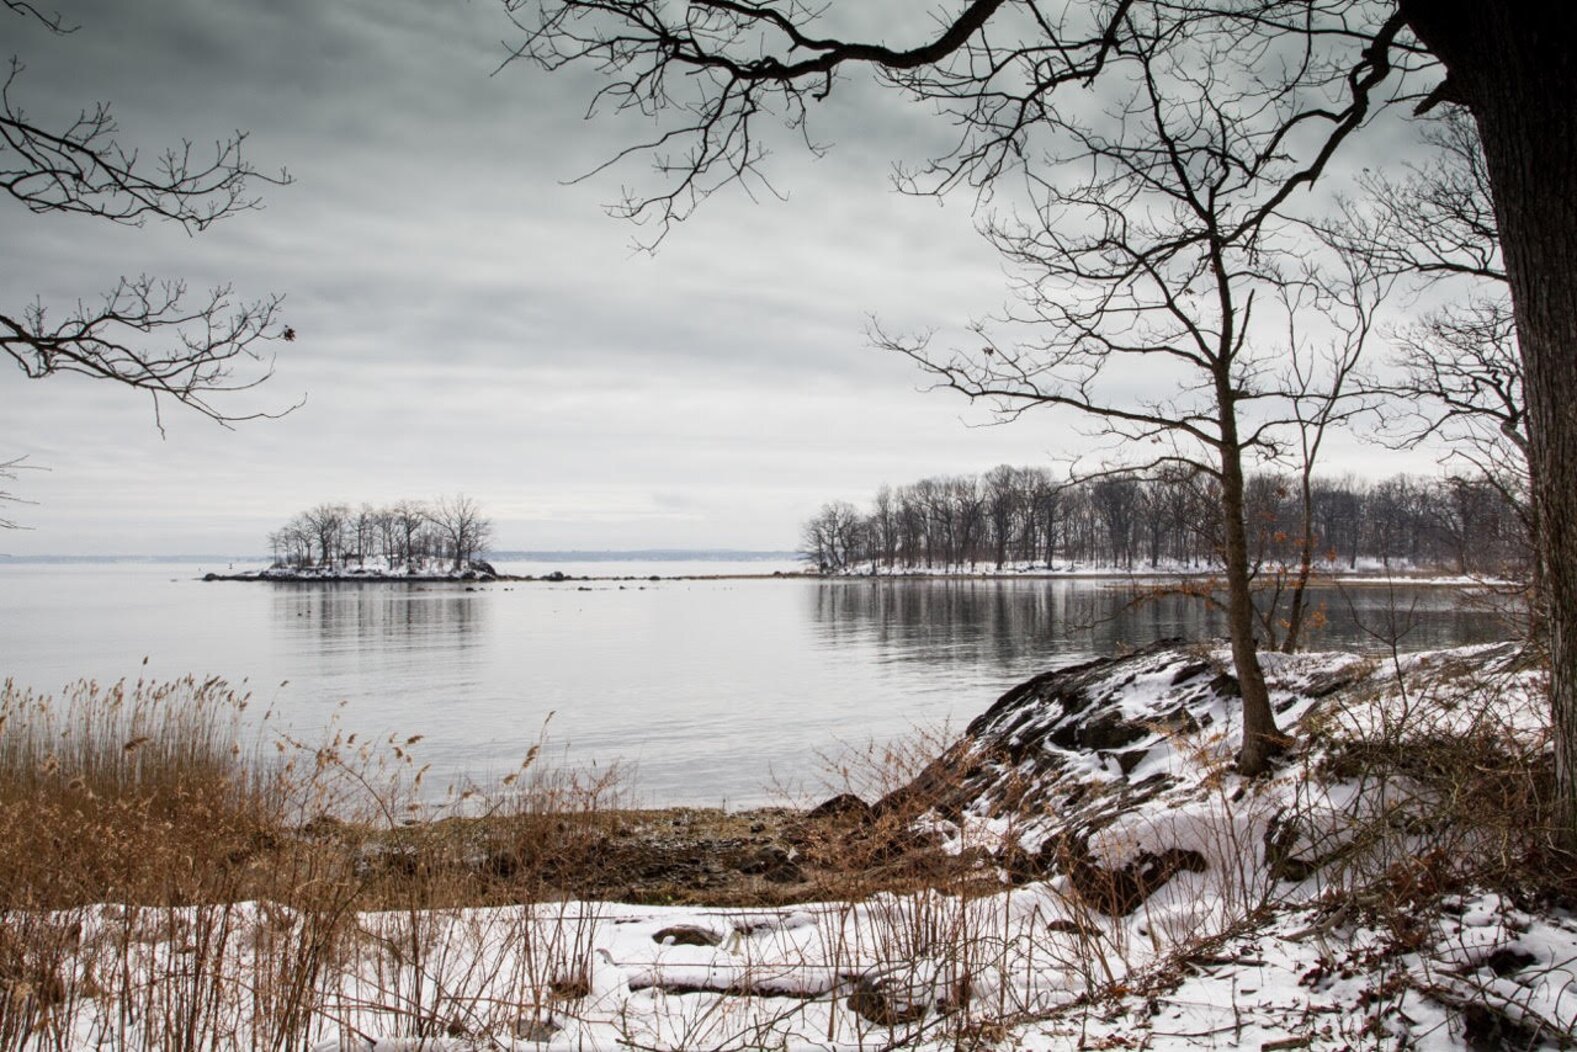 Winter ducks congregate in the waters of Pelham Bay, seen here from Hunter Island. Two Tree Island and Twin Island are visible, from left to right. Photo: <a href="http://www.cityislandbirds.com" target="_blank">Jack Rothman</a>